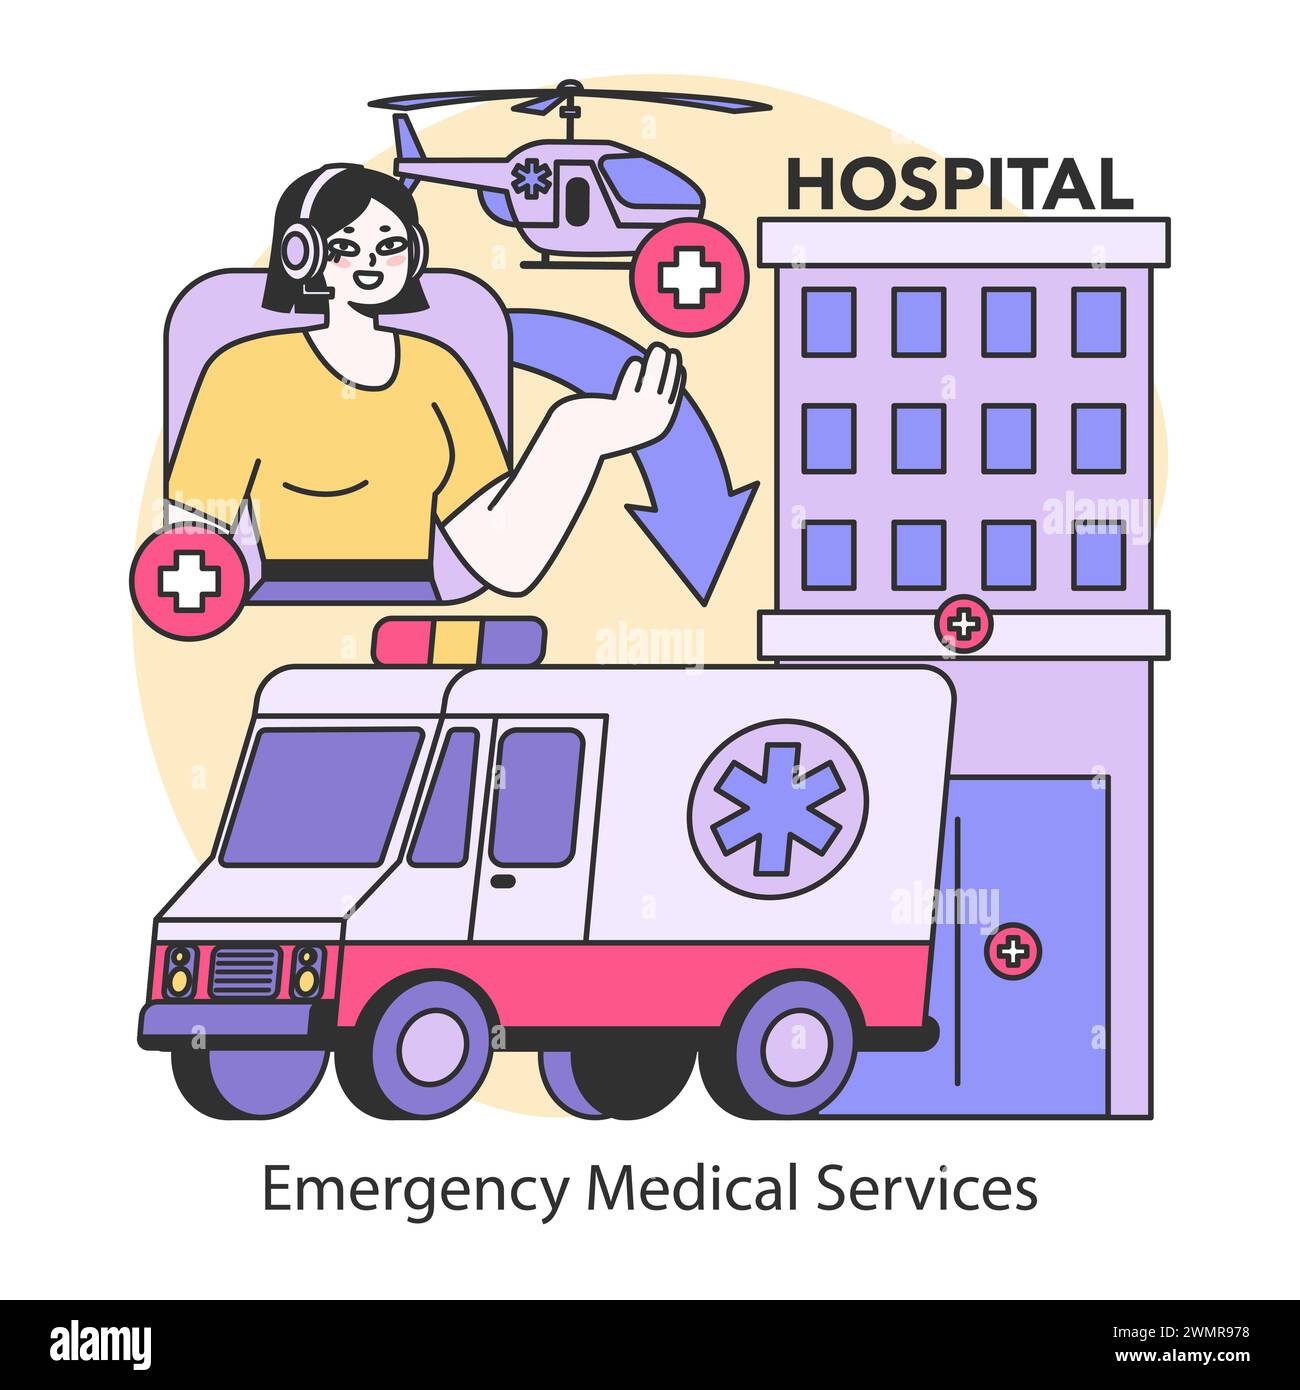 Emergency Medical Services concept. A swift response with ambulance and airlift options, ensuring rapid hospital admission and care. Flat vector illustration. Stock Vector